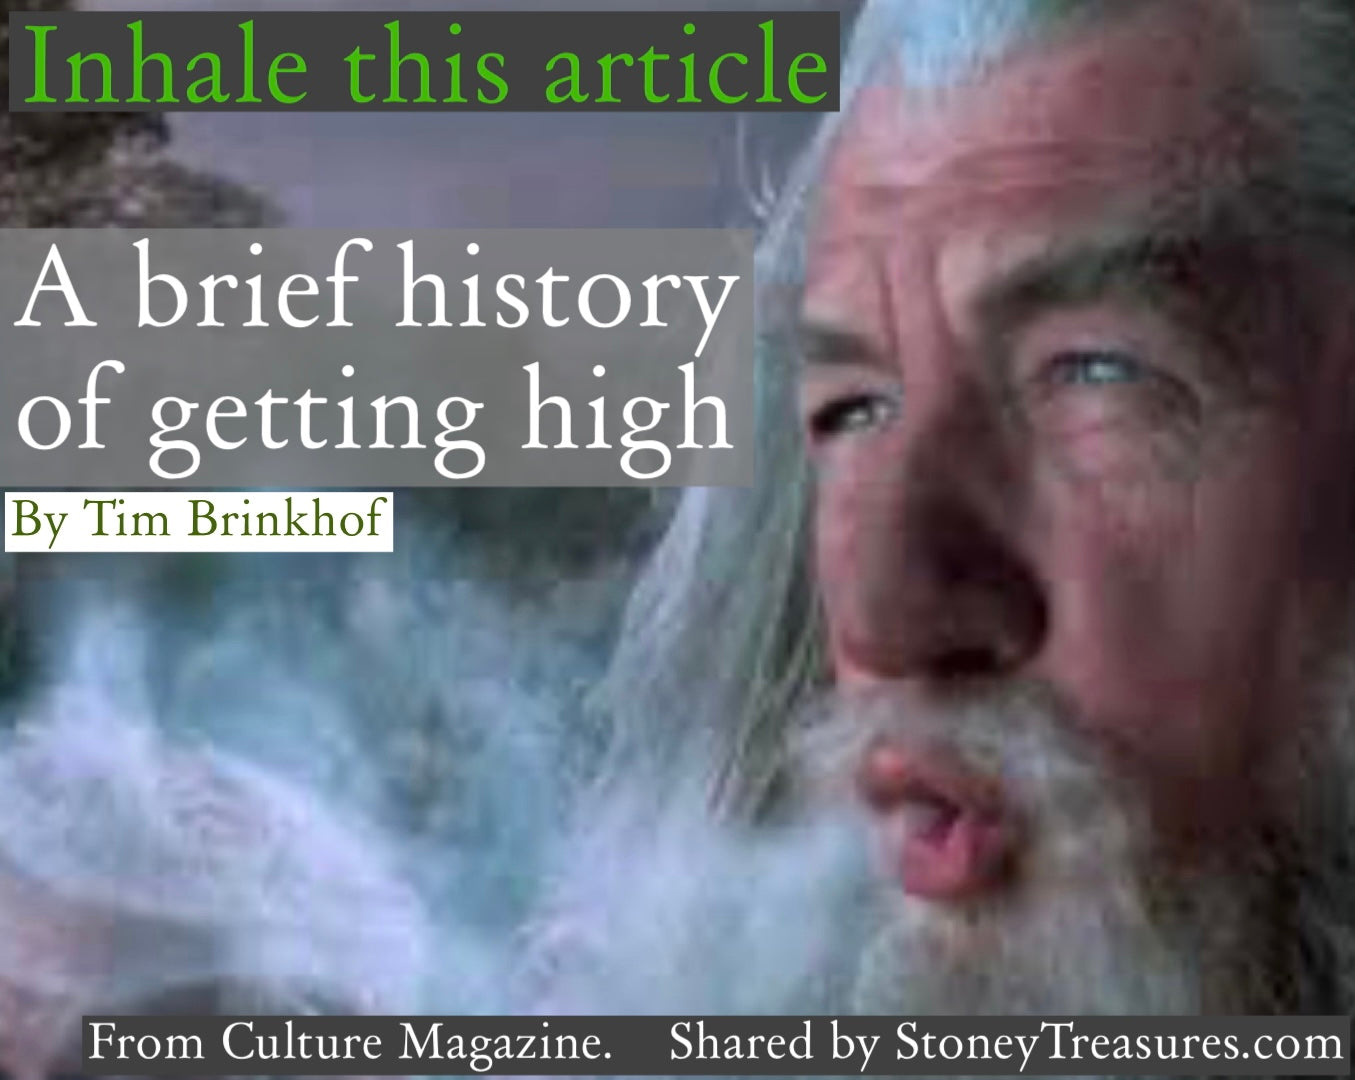 A Brief History Of Getting High, shared by Stoney Treasures